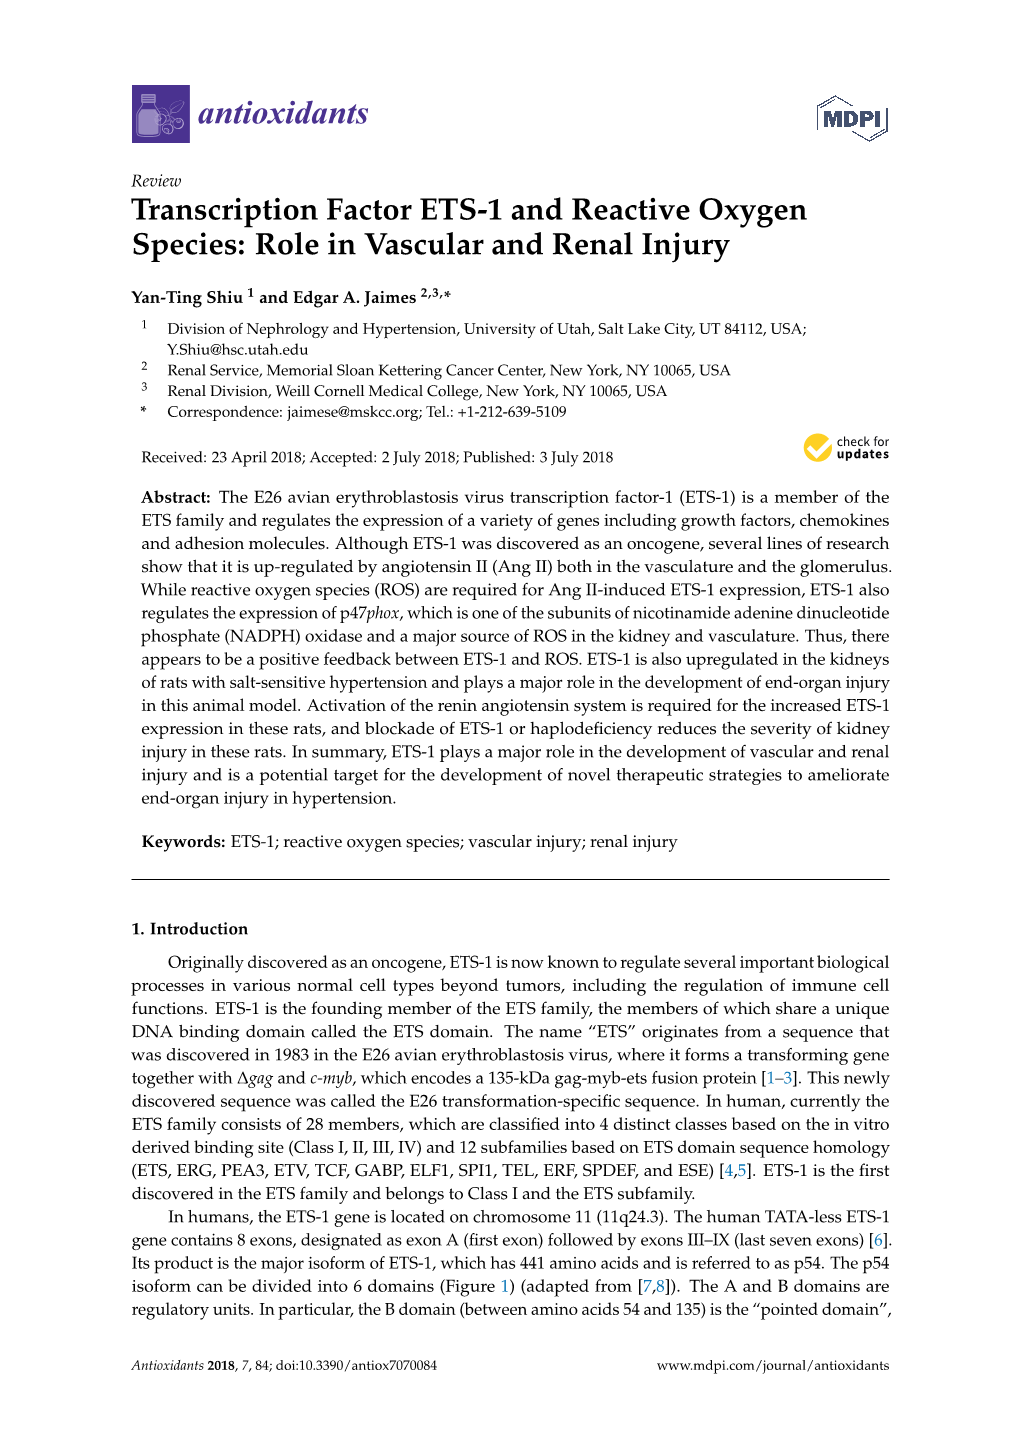 Transcription Factor ETS-1 and Reactive Oxygen Species: Role in Vascular and Renal Injury